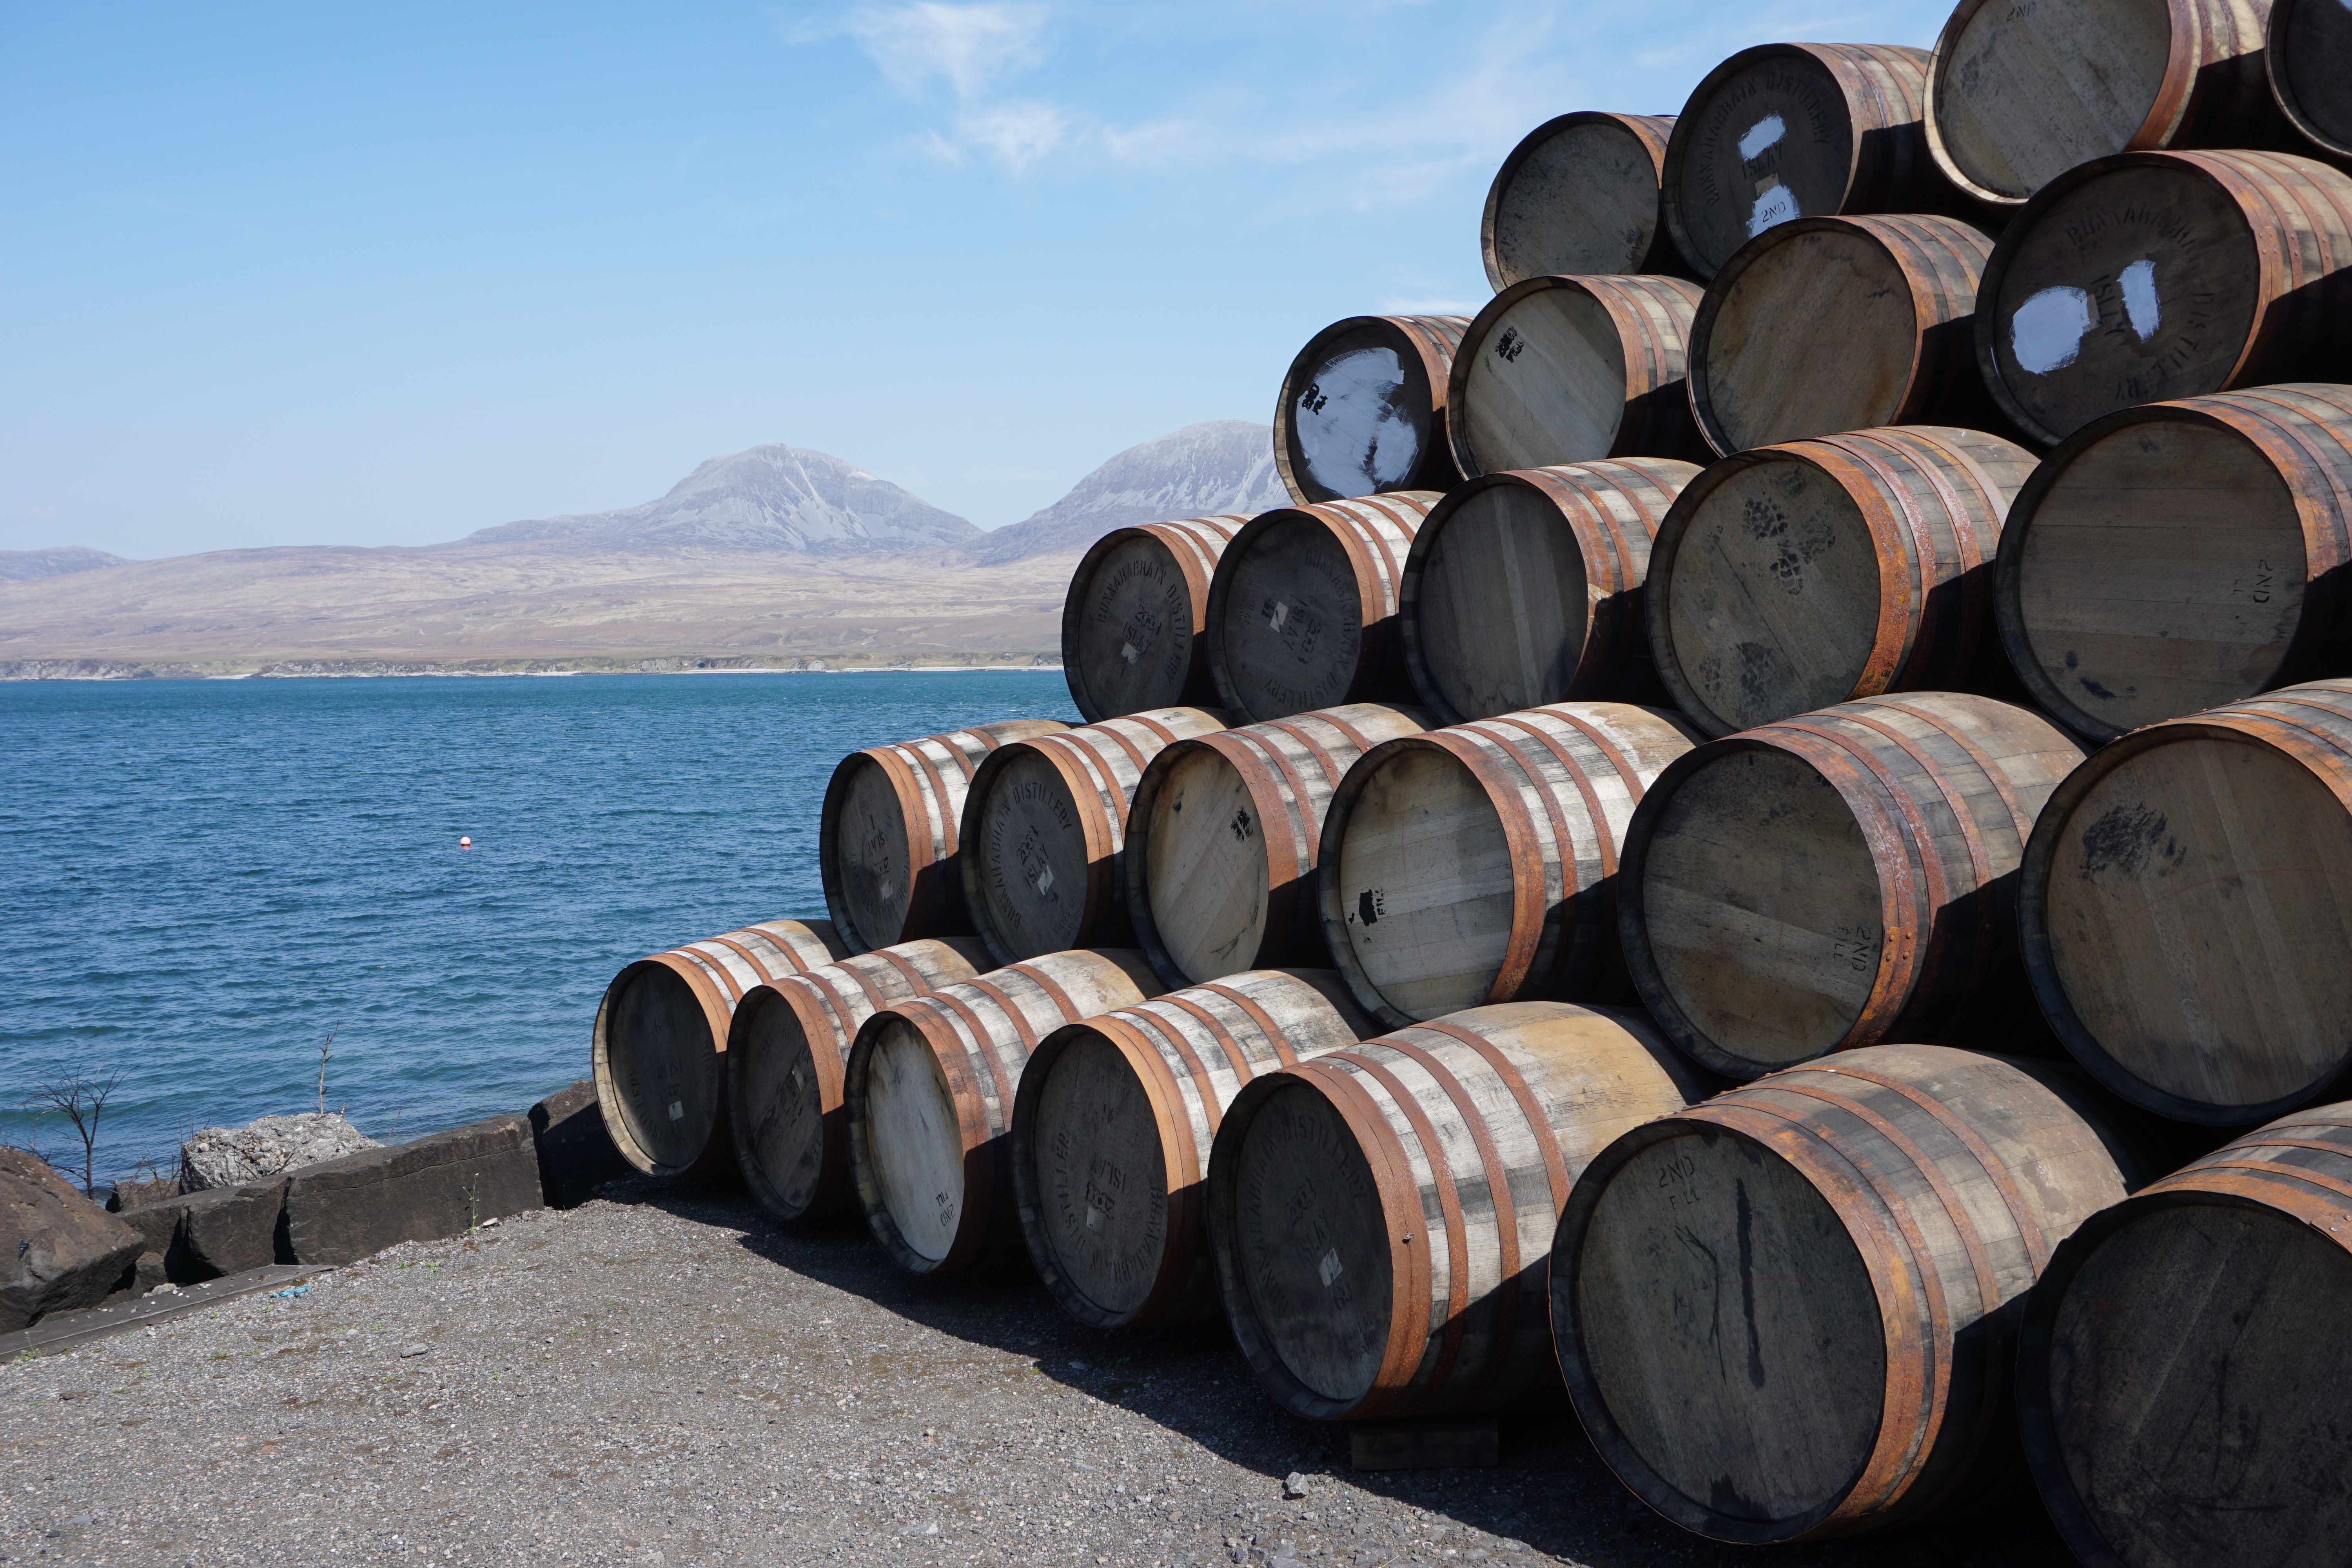 Whiskey barrels stacked together by the ocean